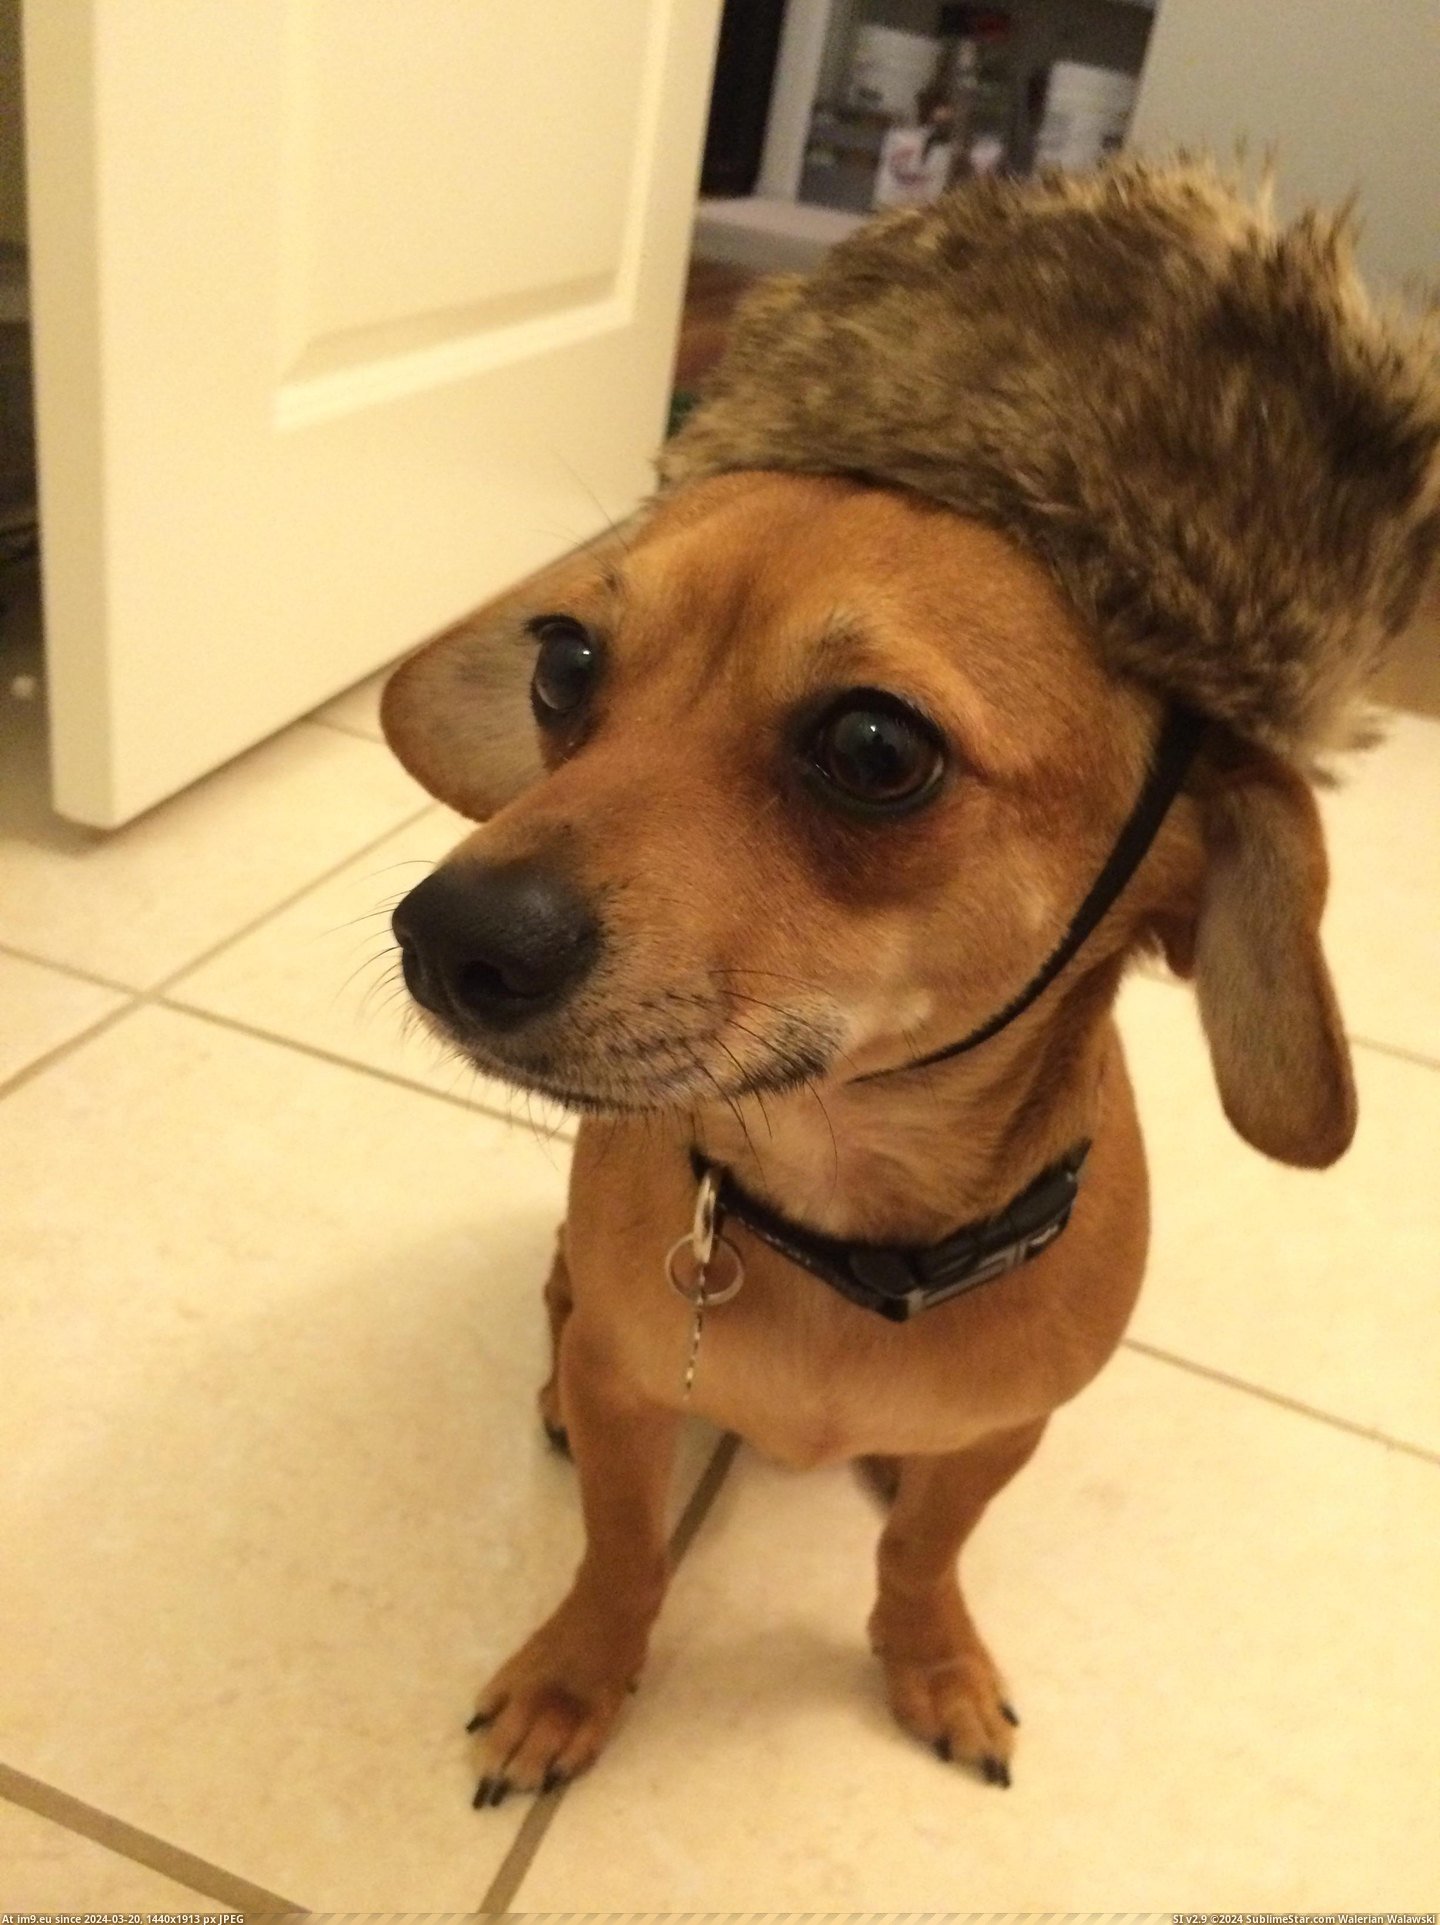 #Was #Tiny #Spent #Hats #Cents #Clearance #Store #Pet #Furry [Aww] The pet store had tiny furry hats on clearance. It was the best 25 cents I've ever spent. Pic. (Изображение из альбом My r/AWW favs))